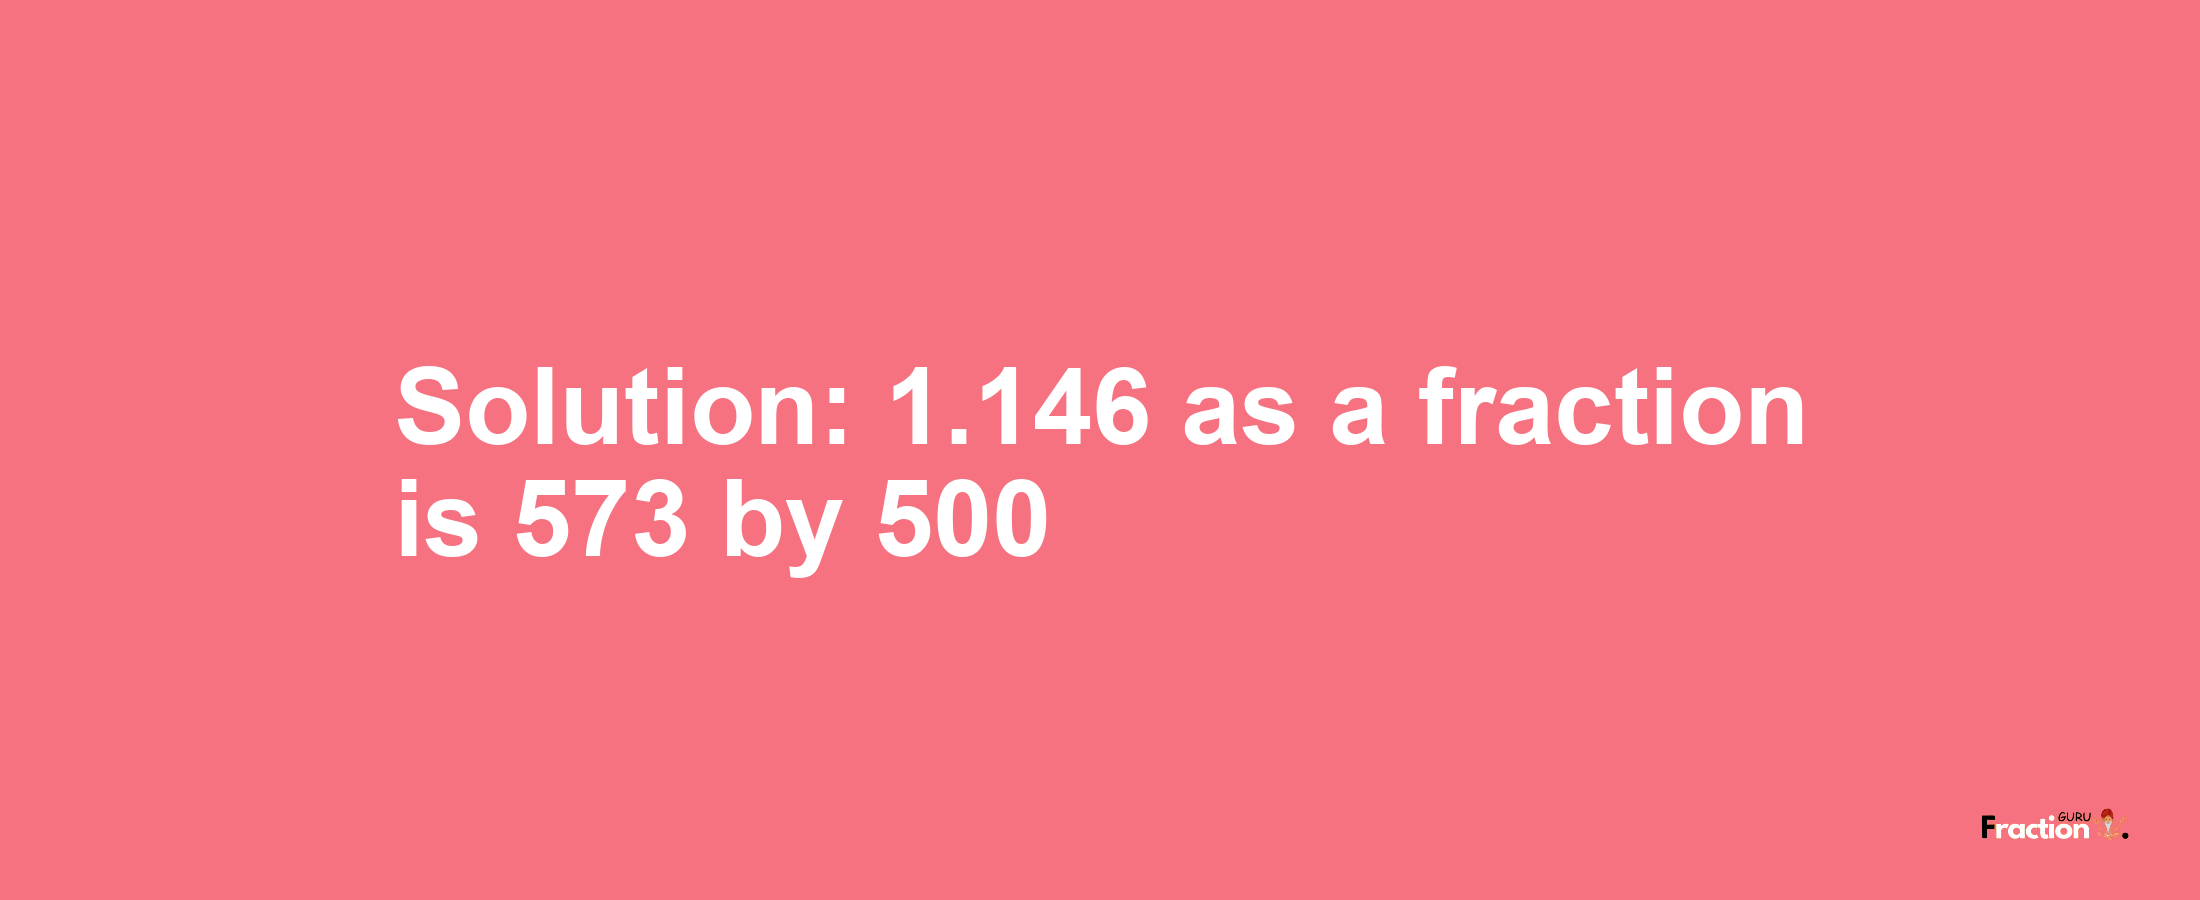 Solution:1.146 as a fraction is 573/500